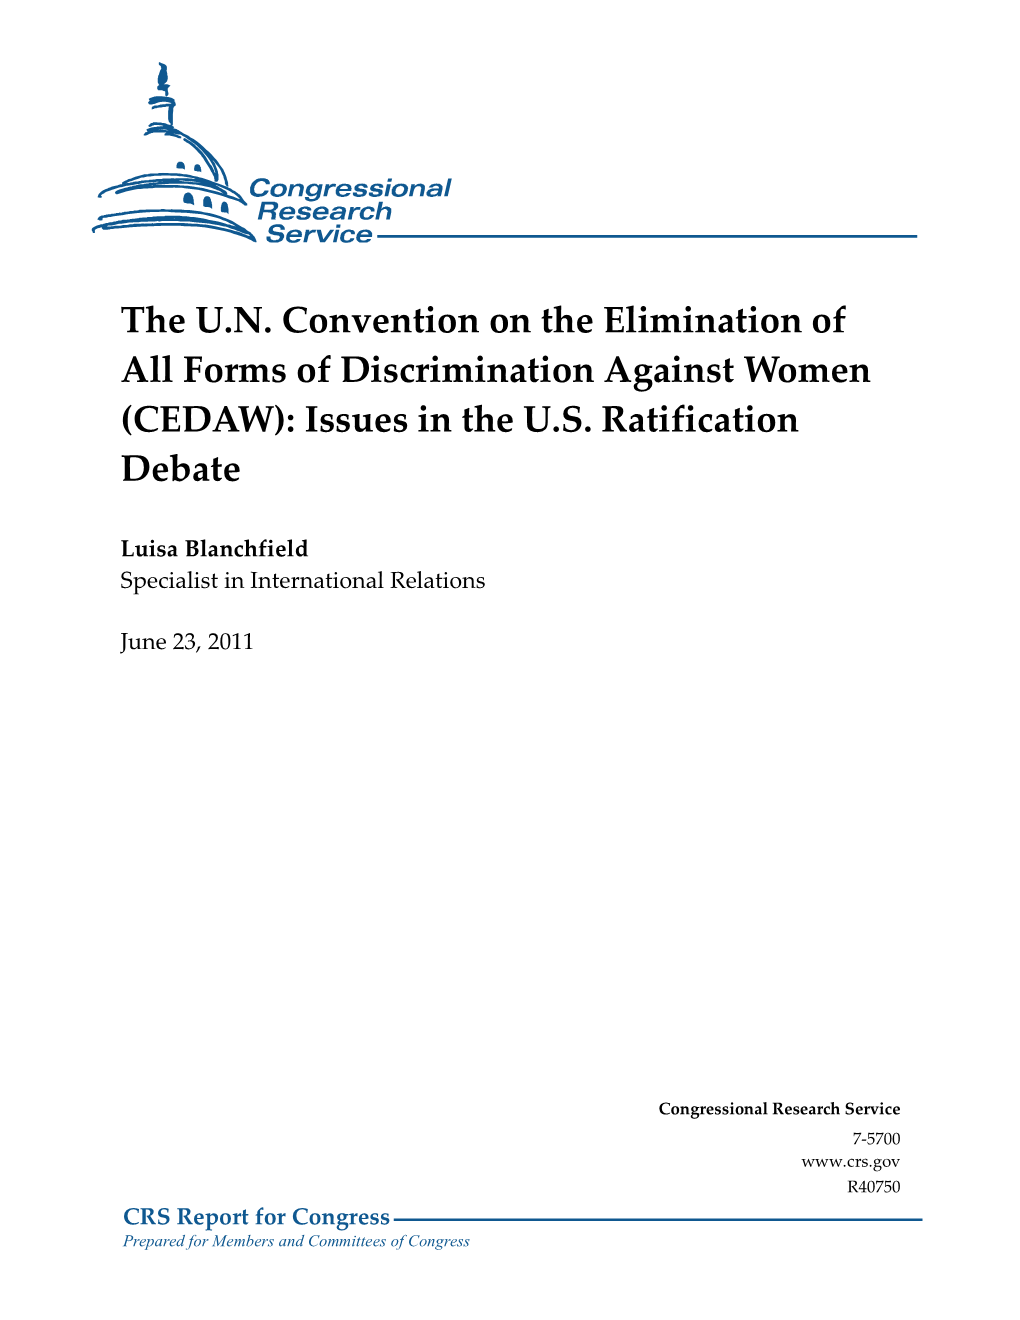 (CEDAW): Issues in the US Ratification Debate